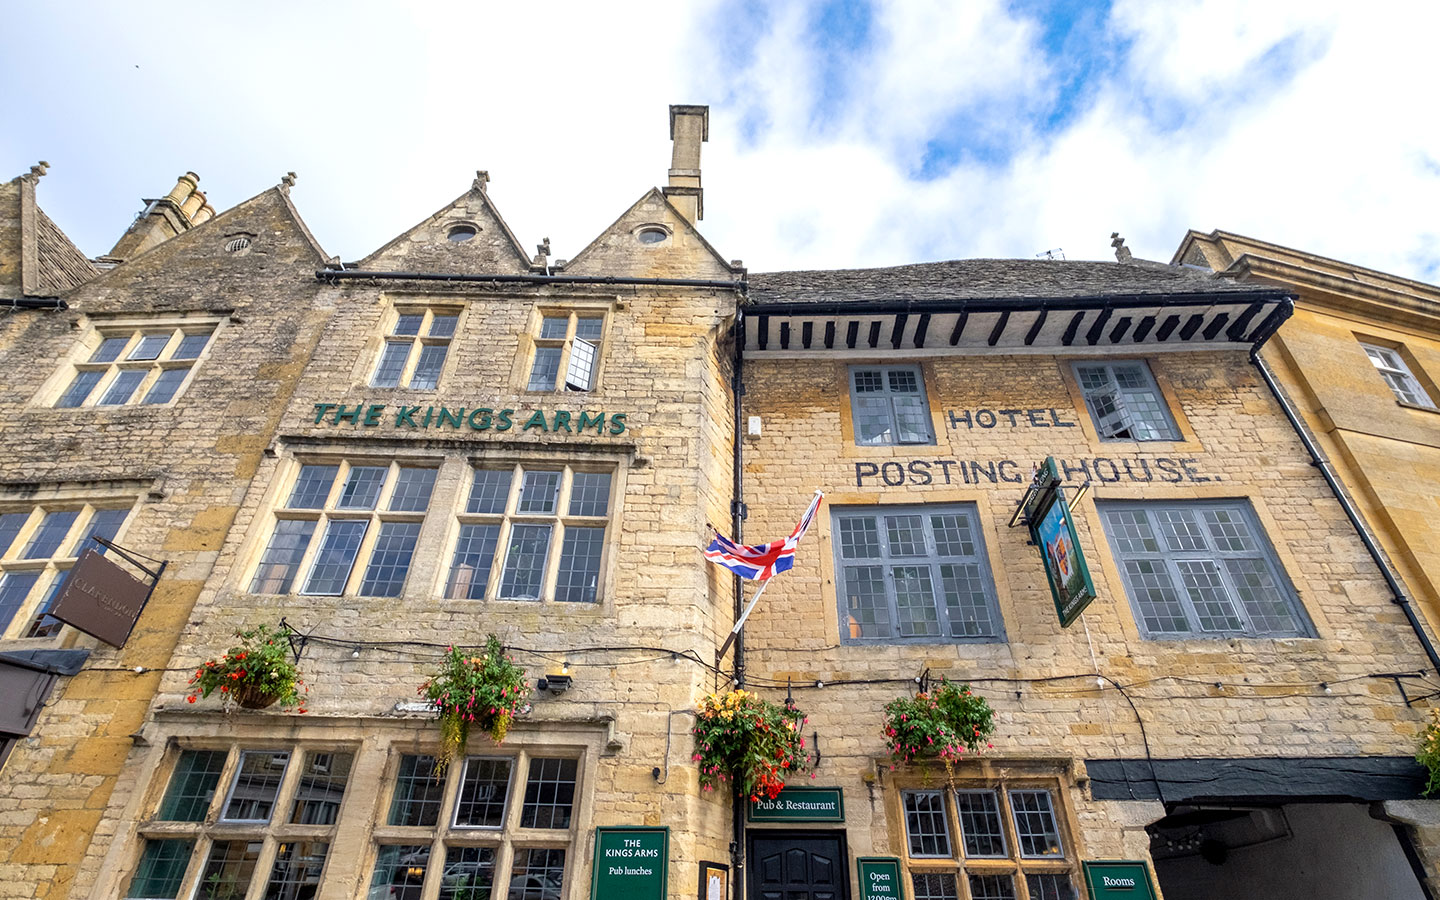 Things to do in Stow-on-the-Wold, Cotswolds: A local’s guide